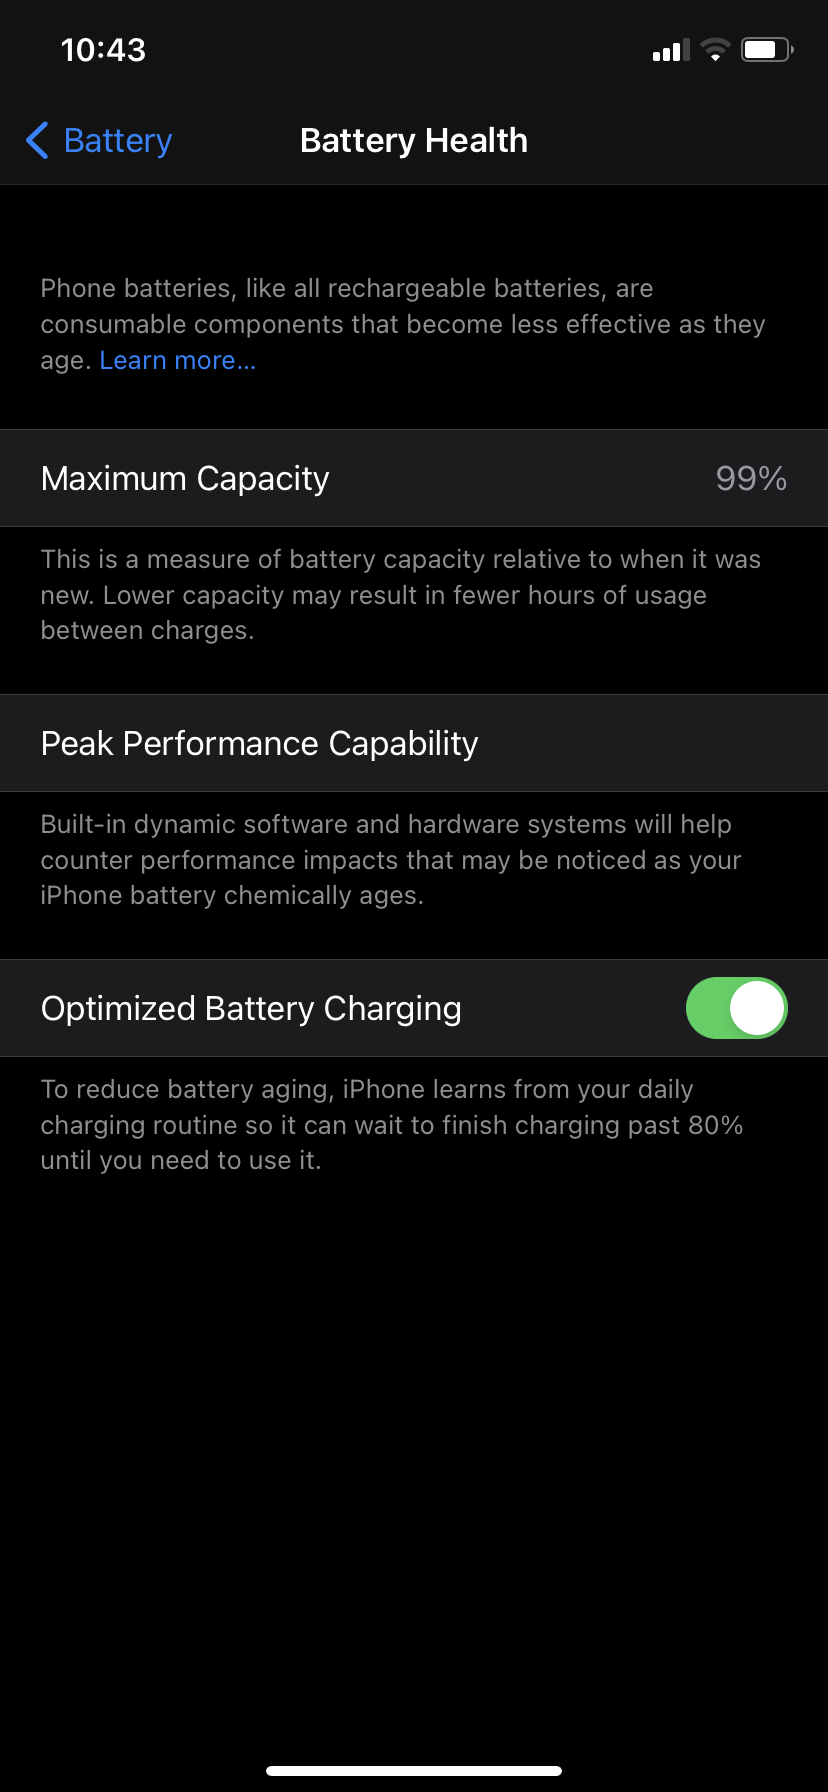 Gammel mand overflade vindue My iPhone 11 battery health 99% why - Apple Community